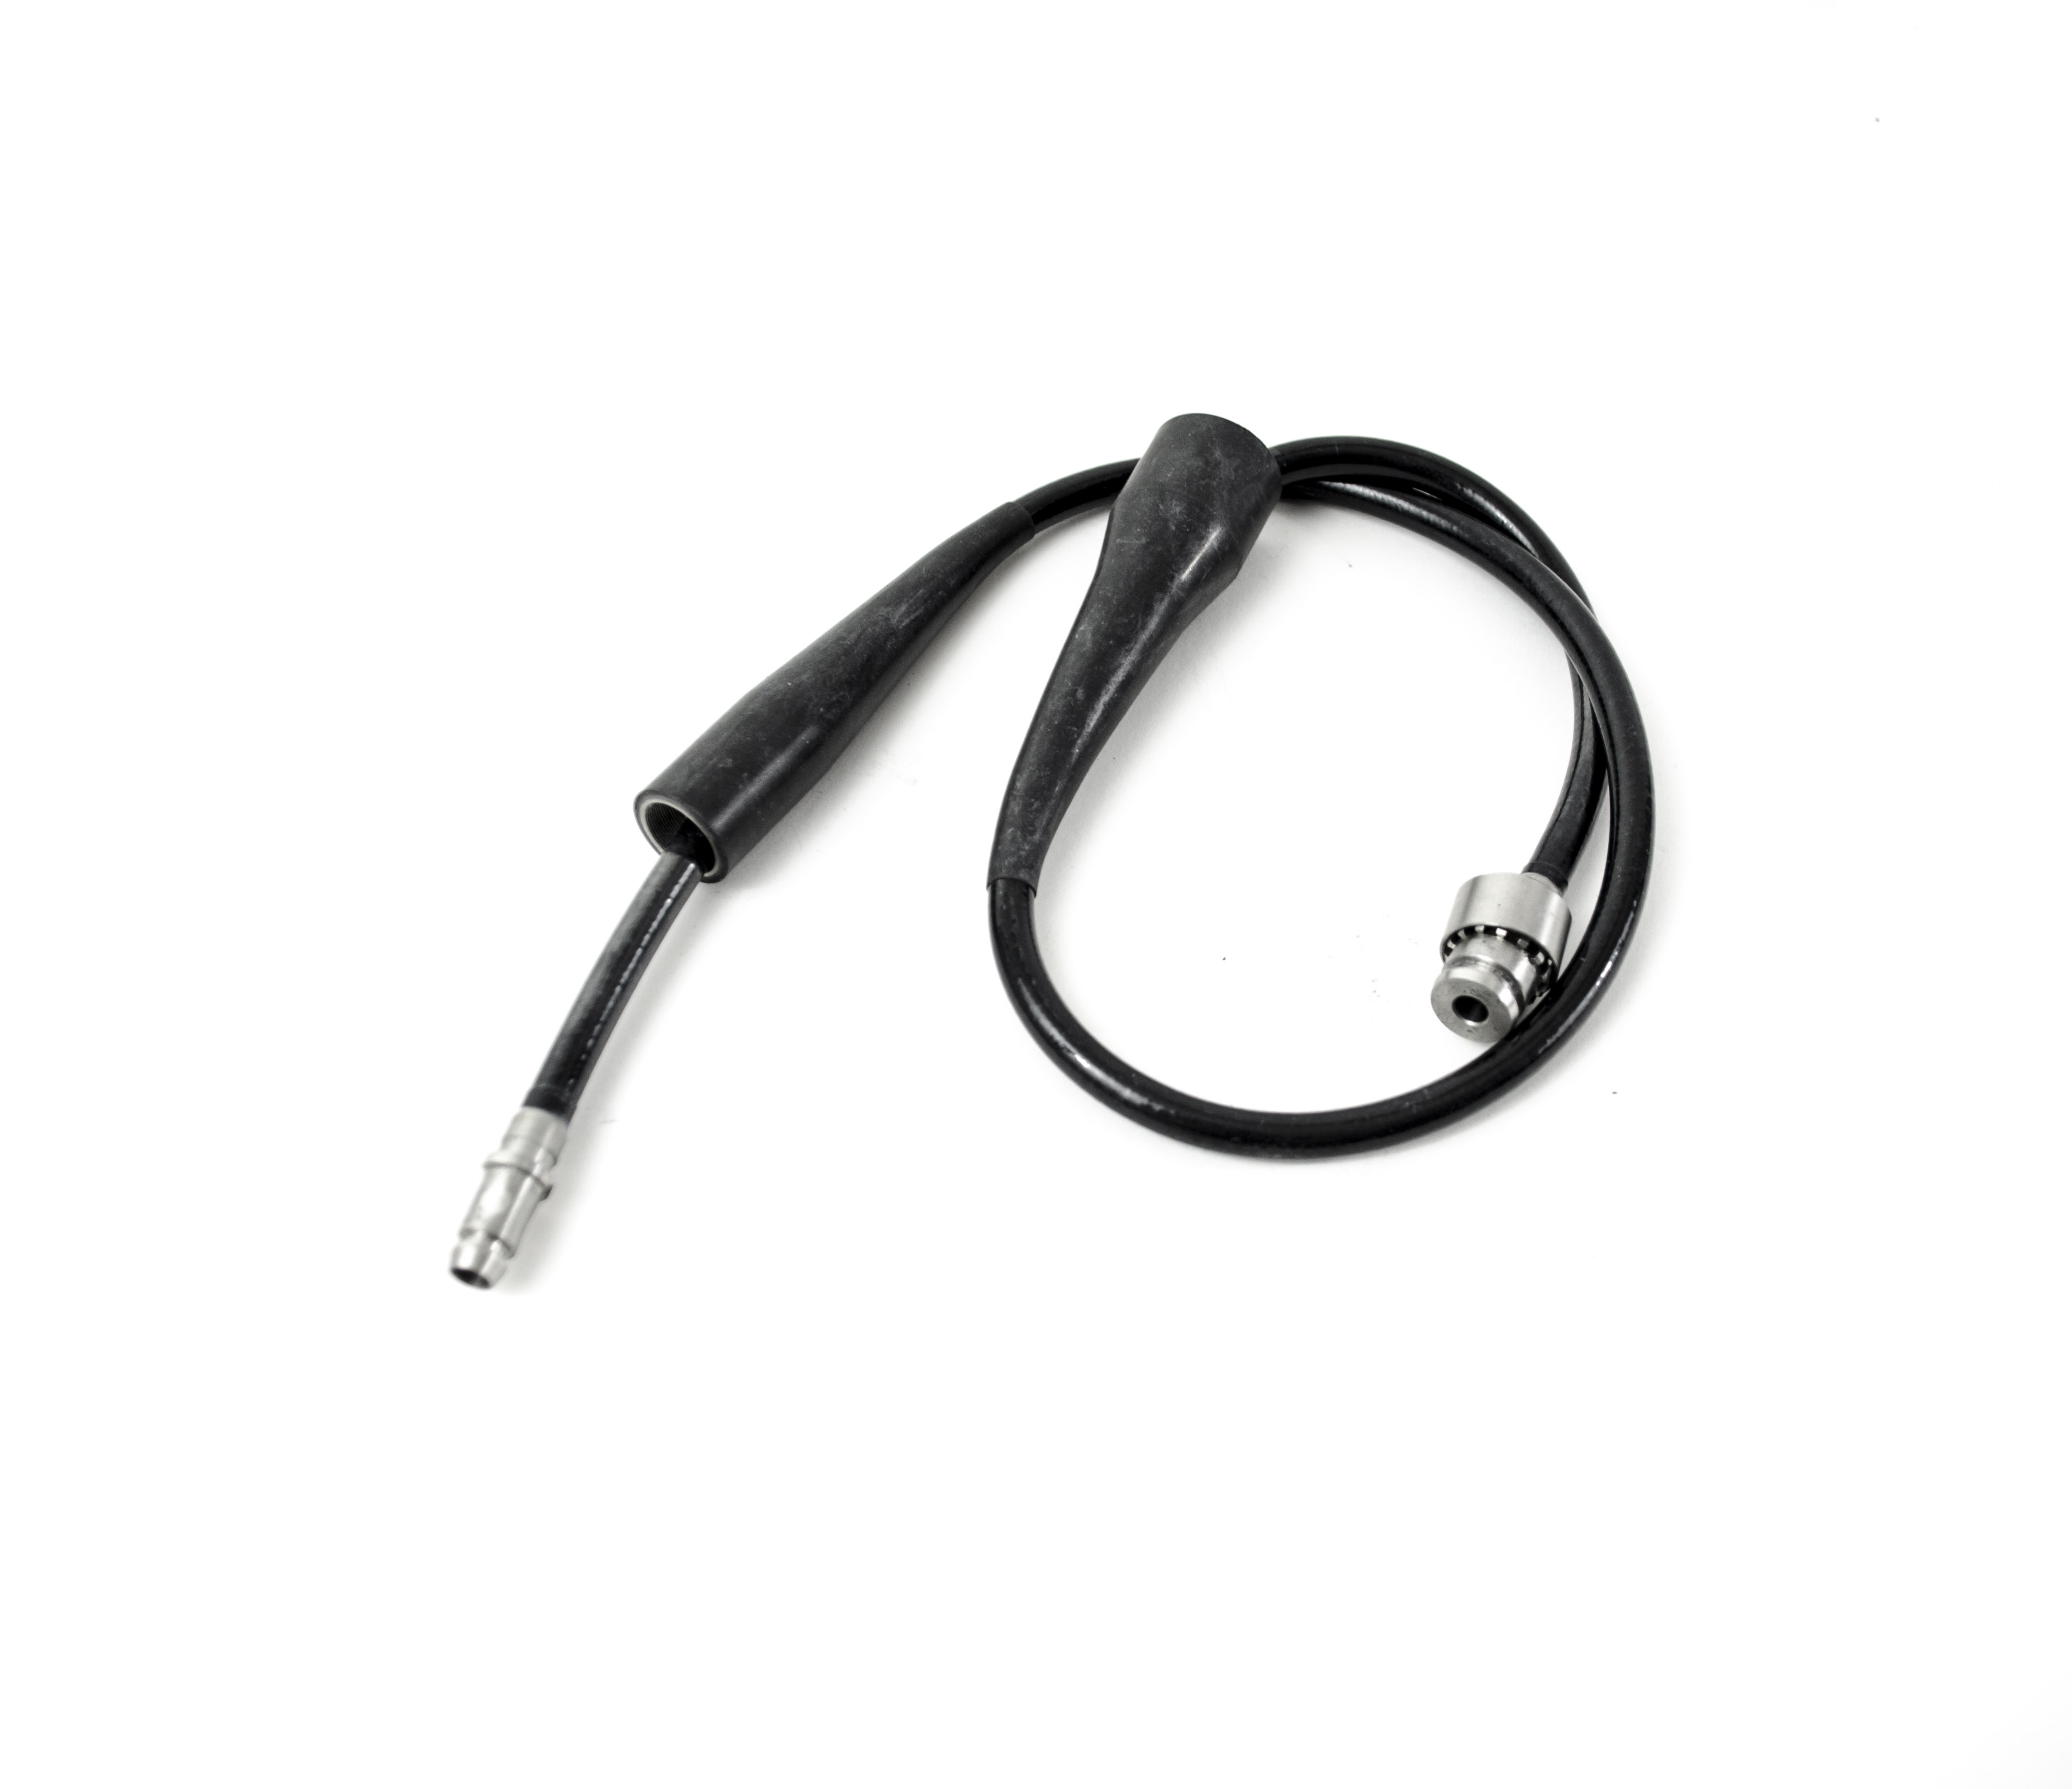 OEM Cable: Video Connector with Boots - ENF-V